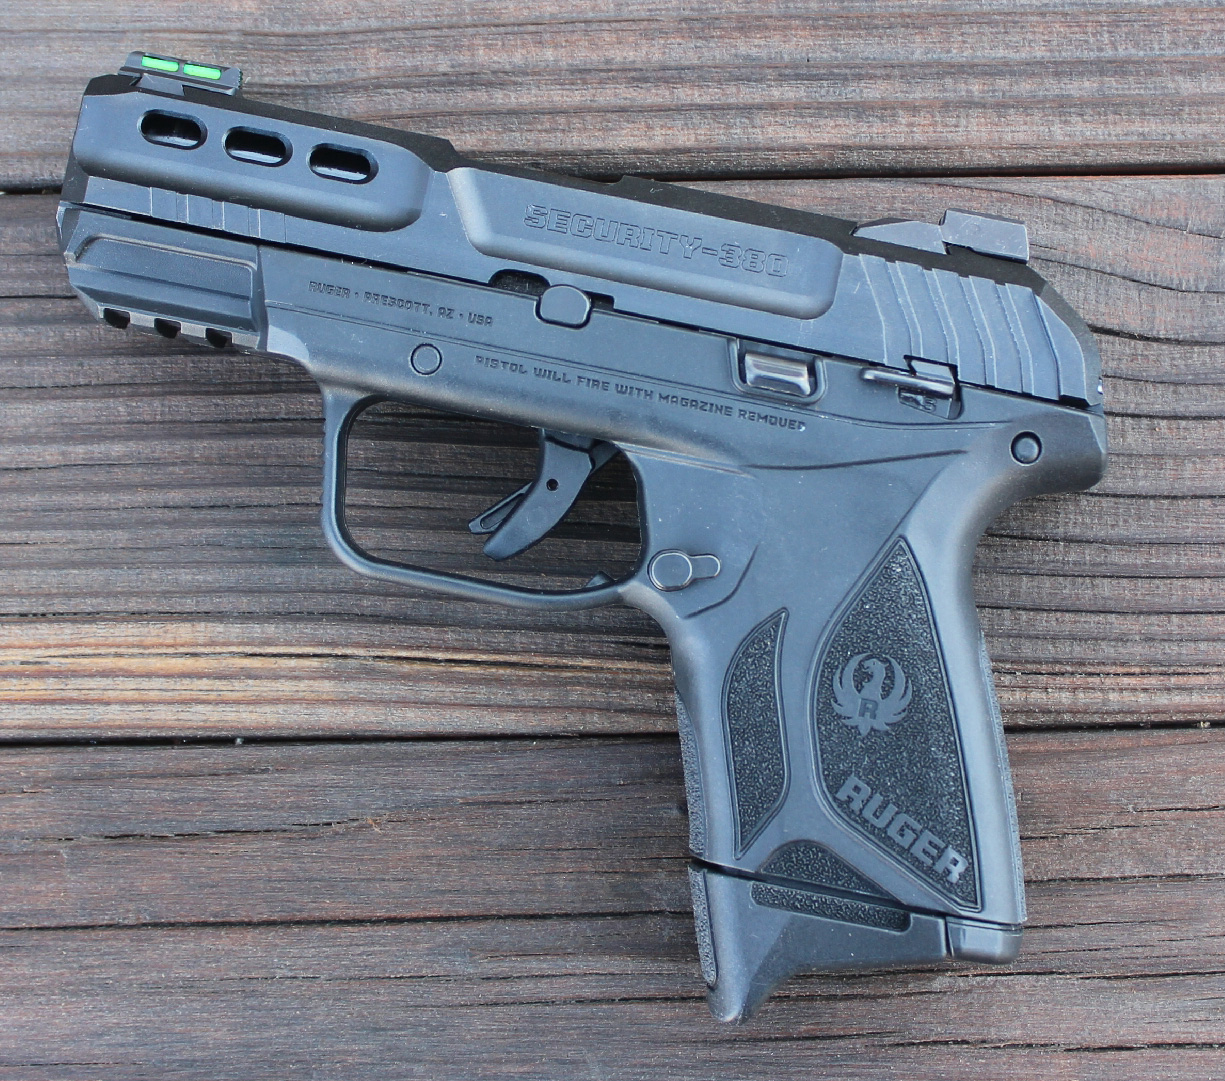 Ruger LCP 380 Review: The Best Pocket Carry Gun?